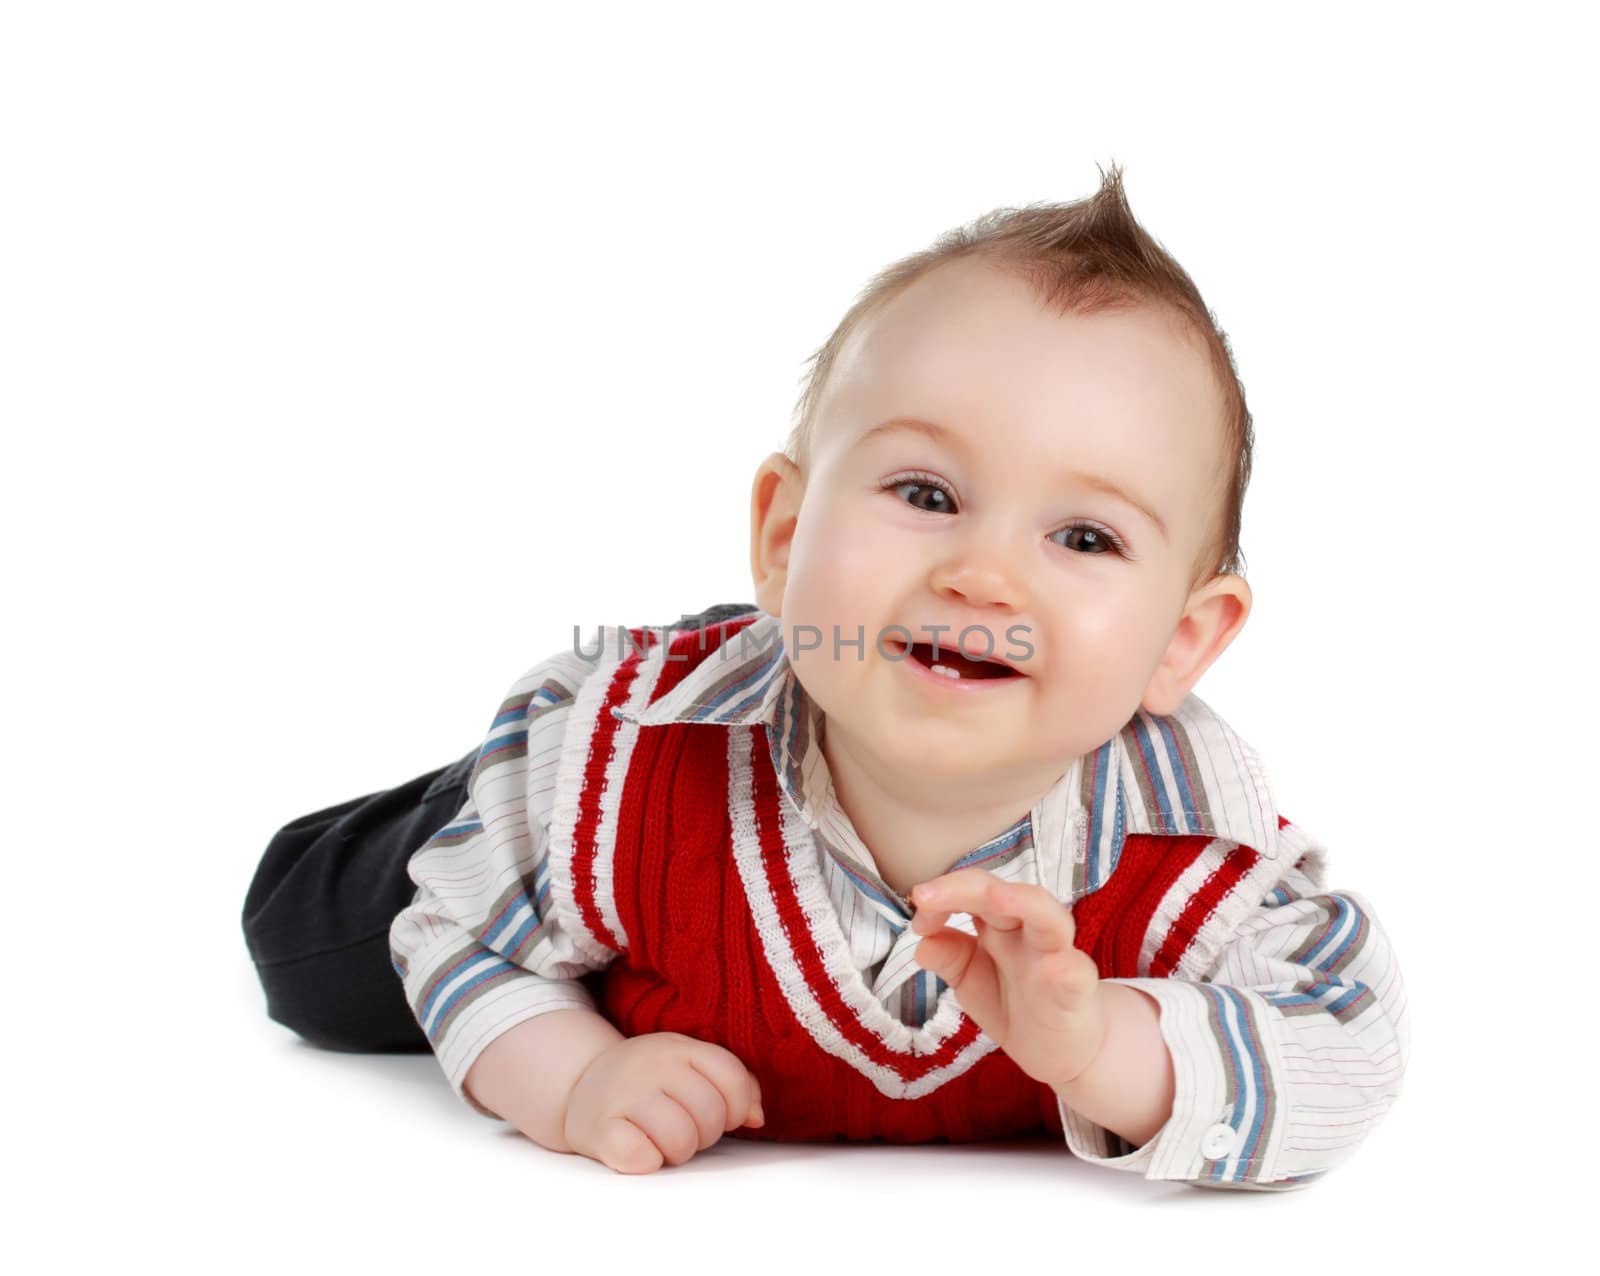 adorable 8 months cacasian baby boy, isolated on white